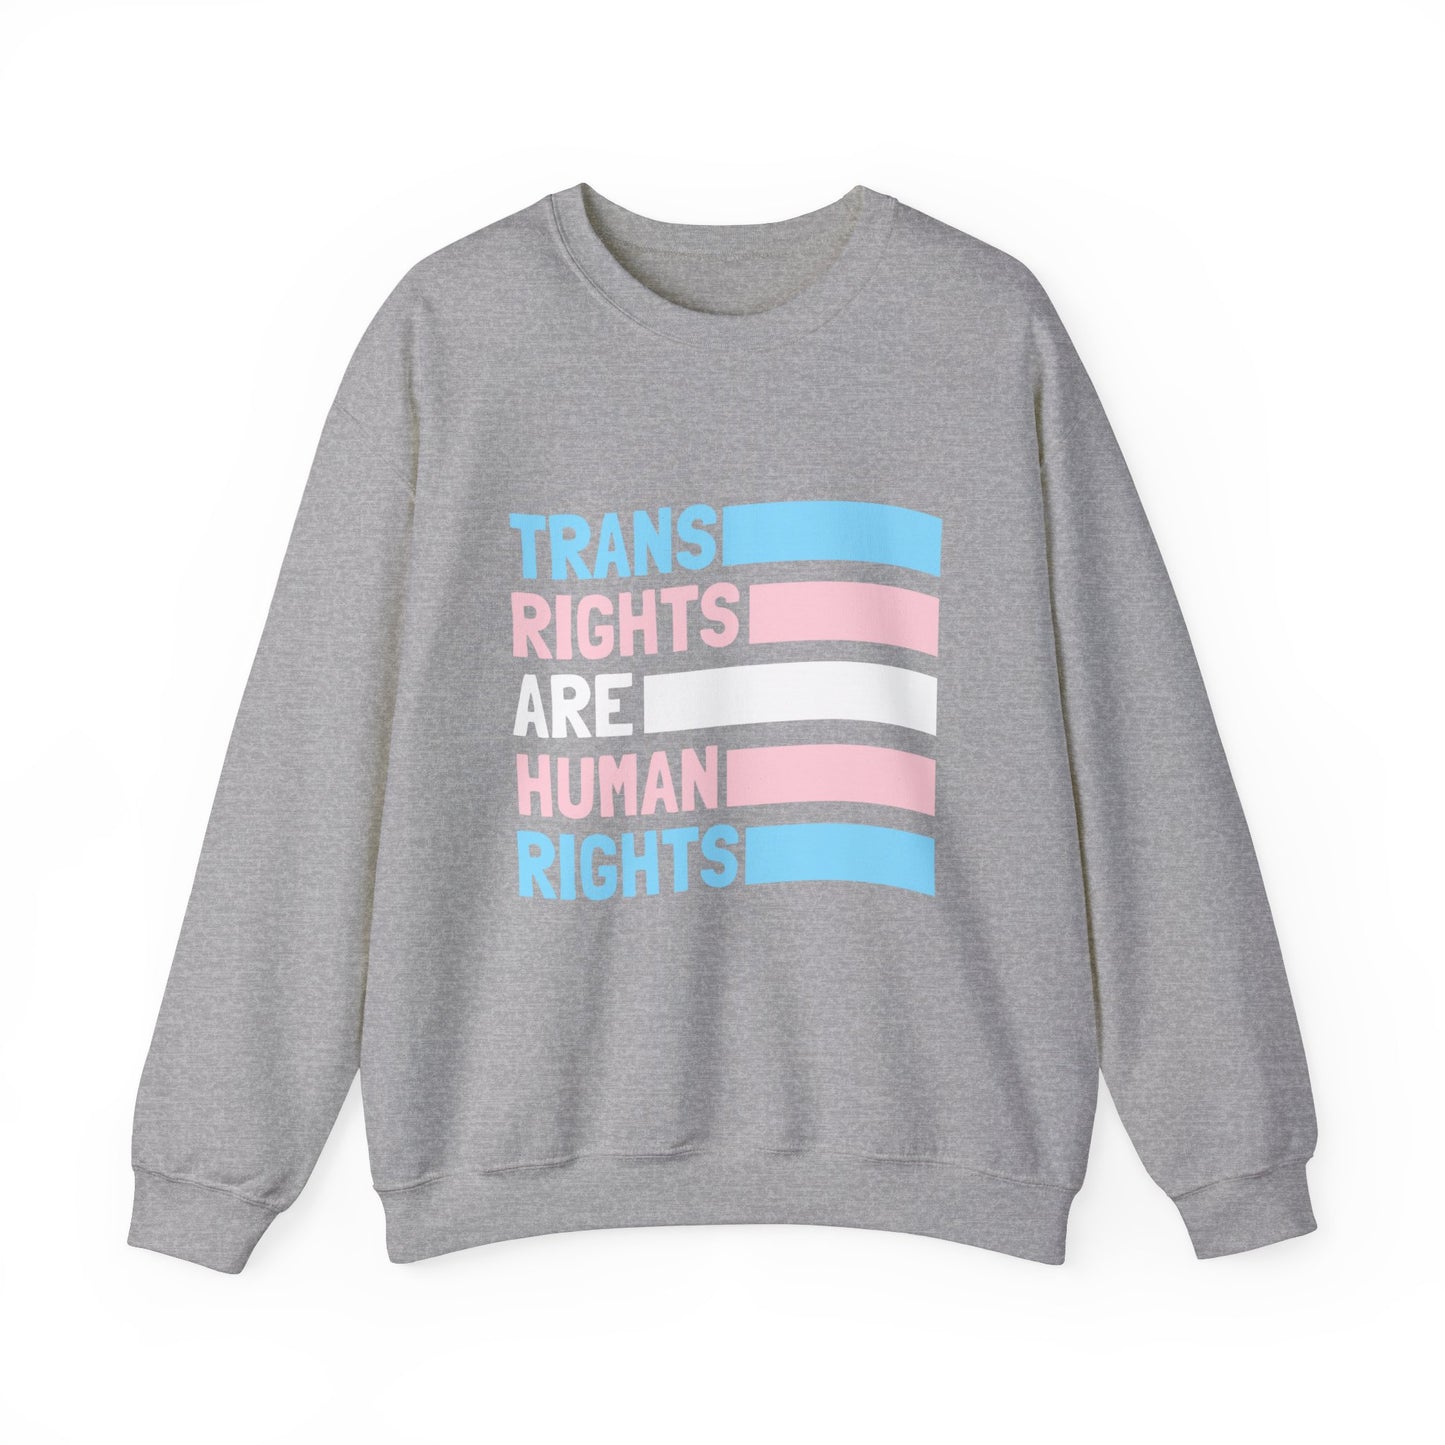 “Trans Rights Are Human Rights” Unisex Sweatshirt